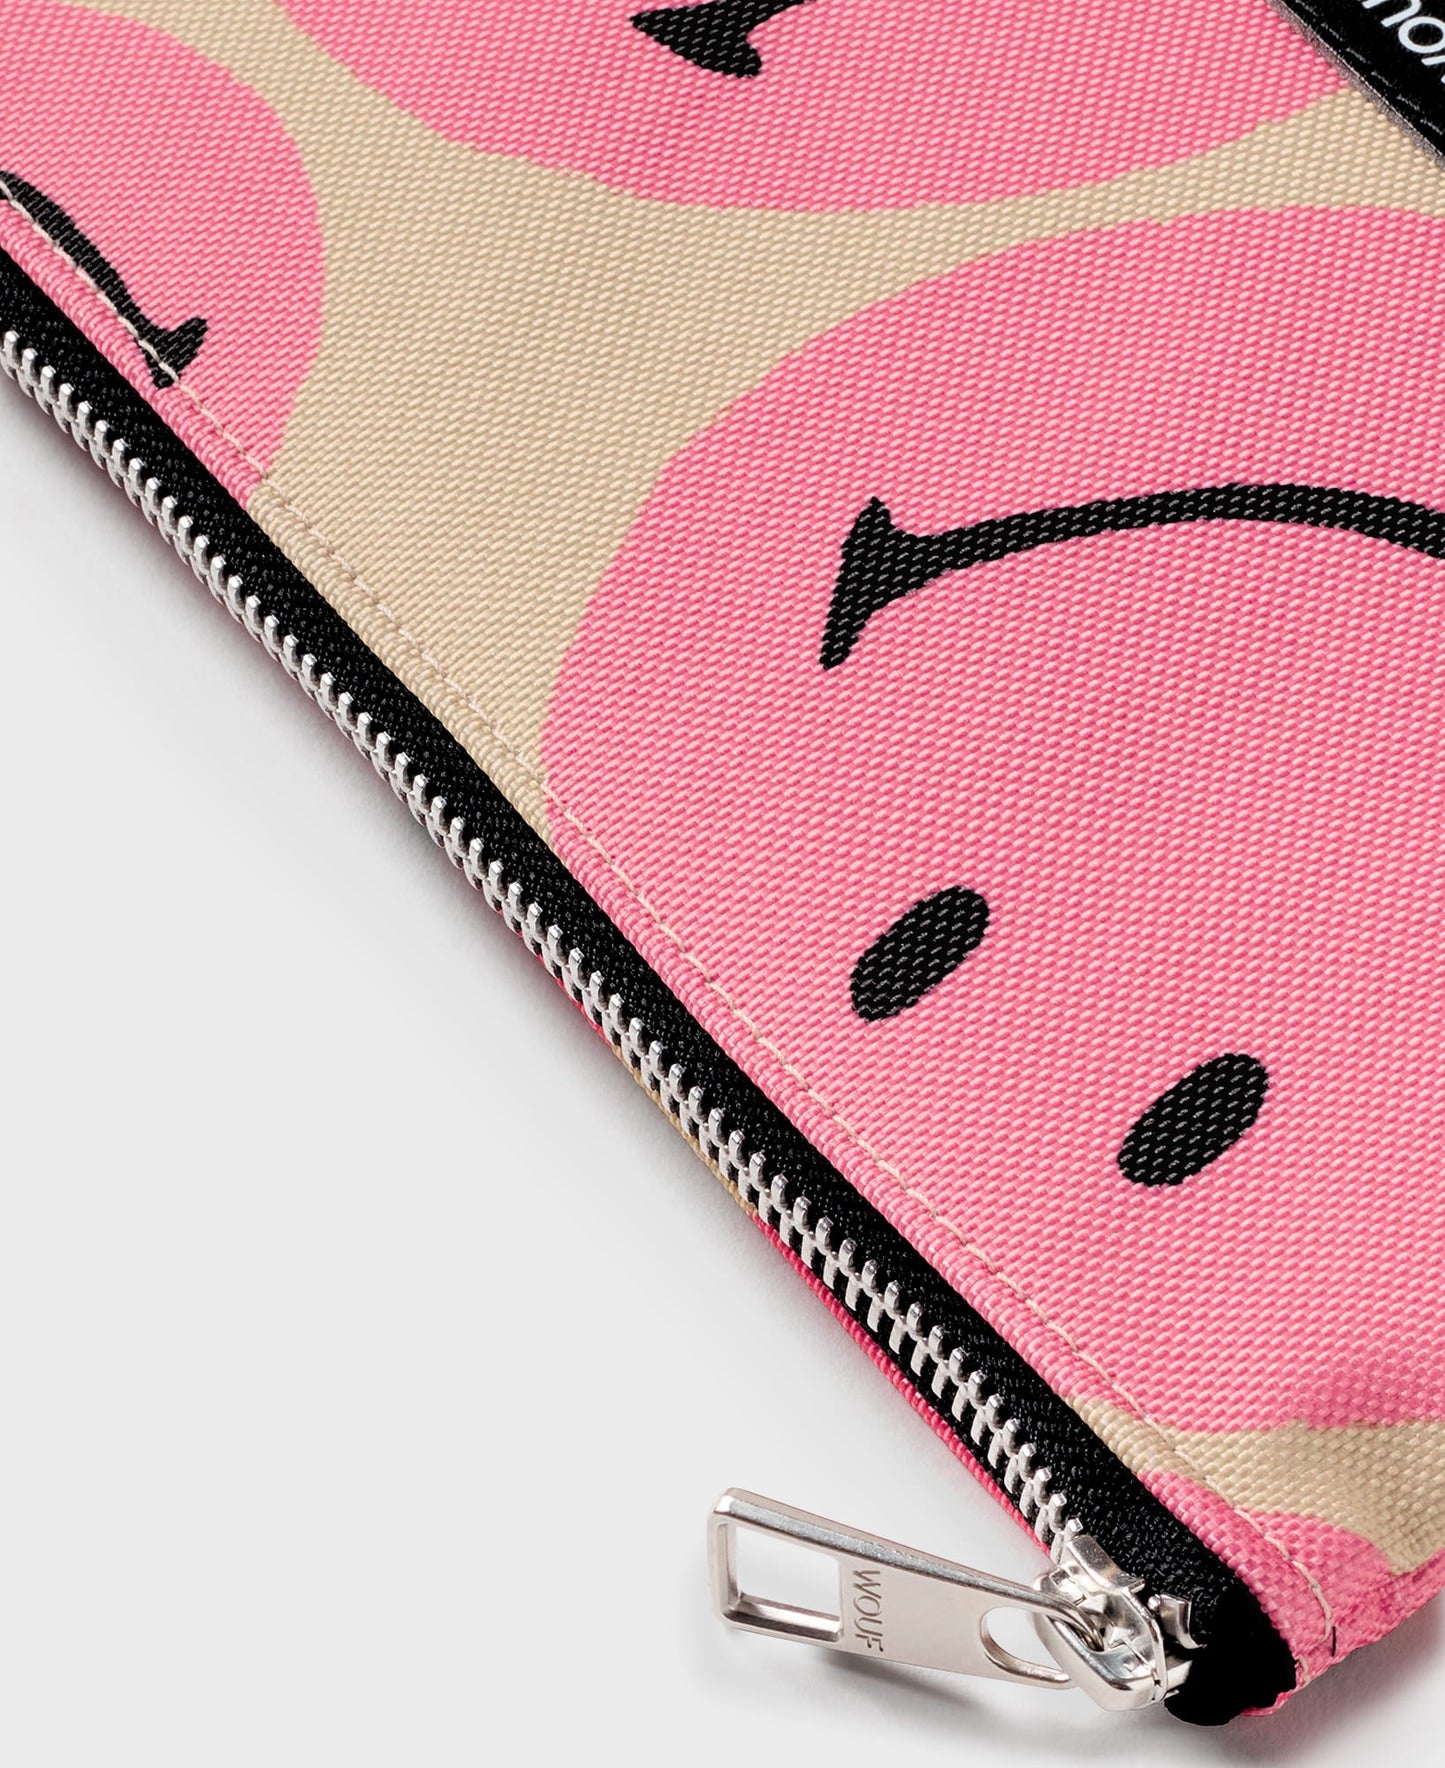 
                  
                    Pink Smiley® Pouch
                  
                